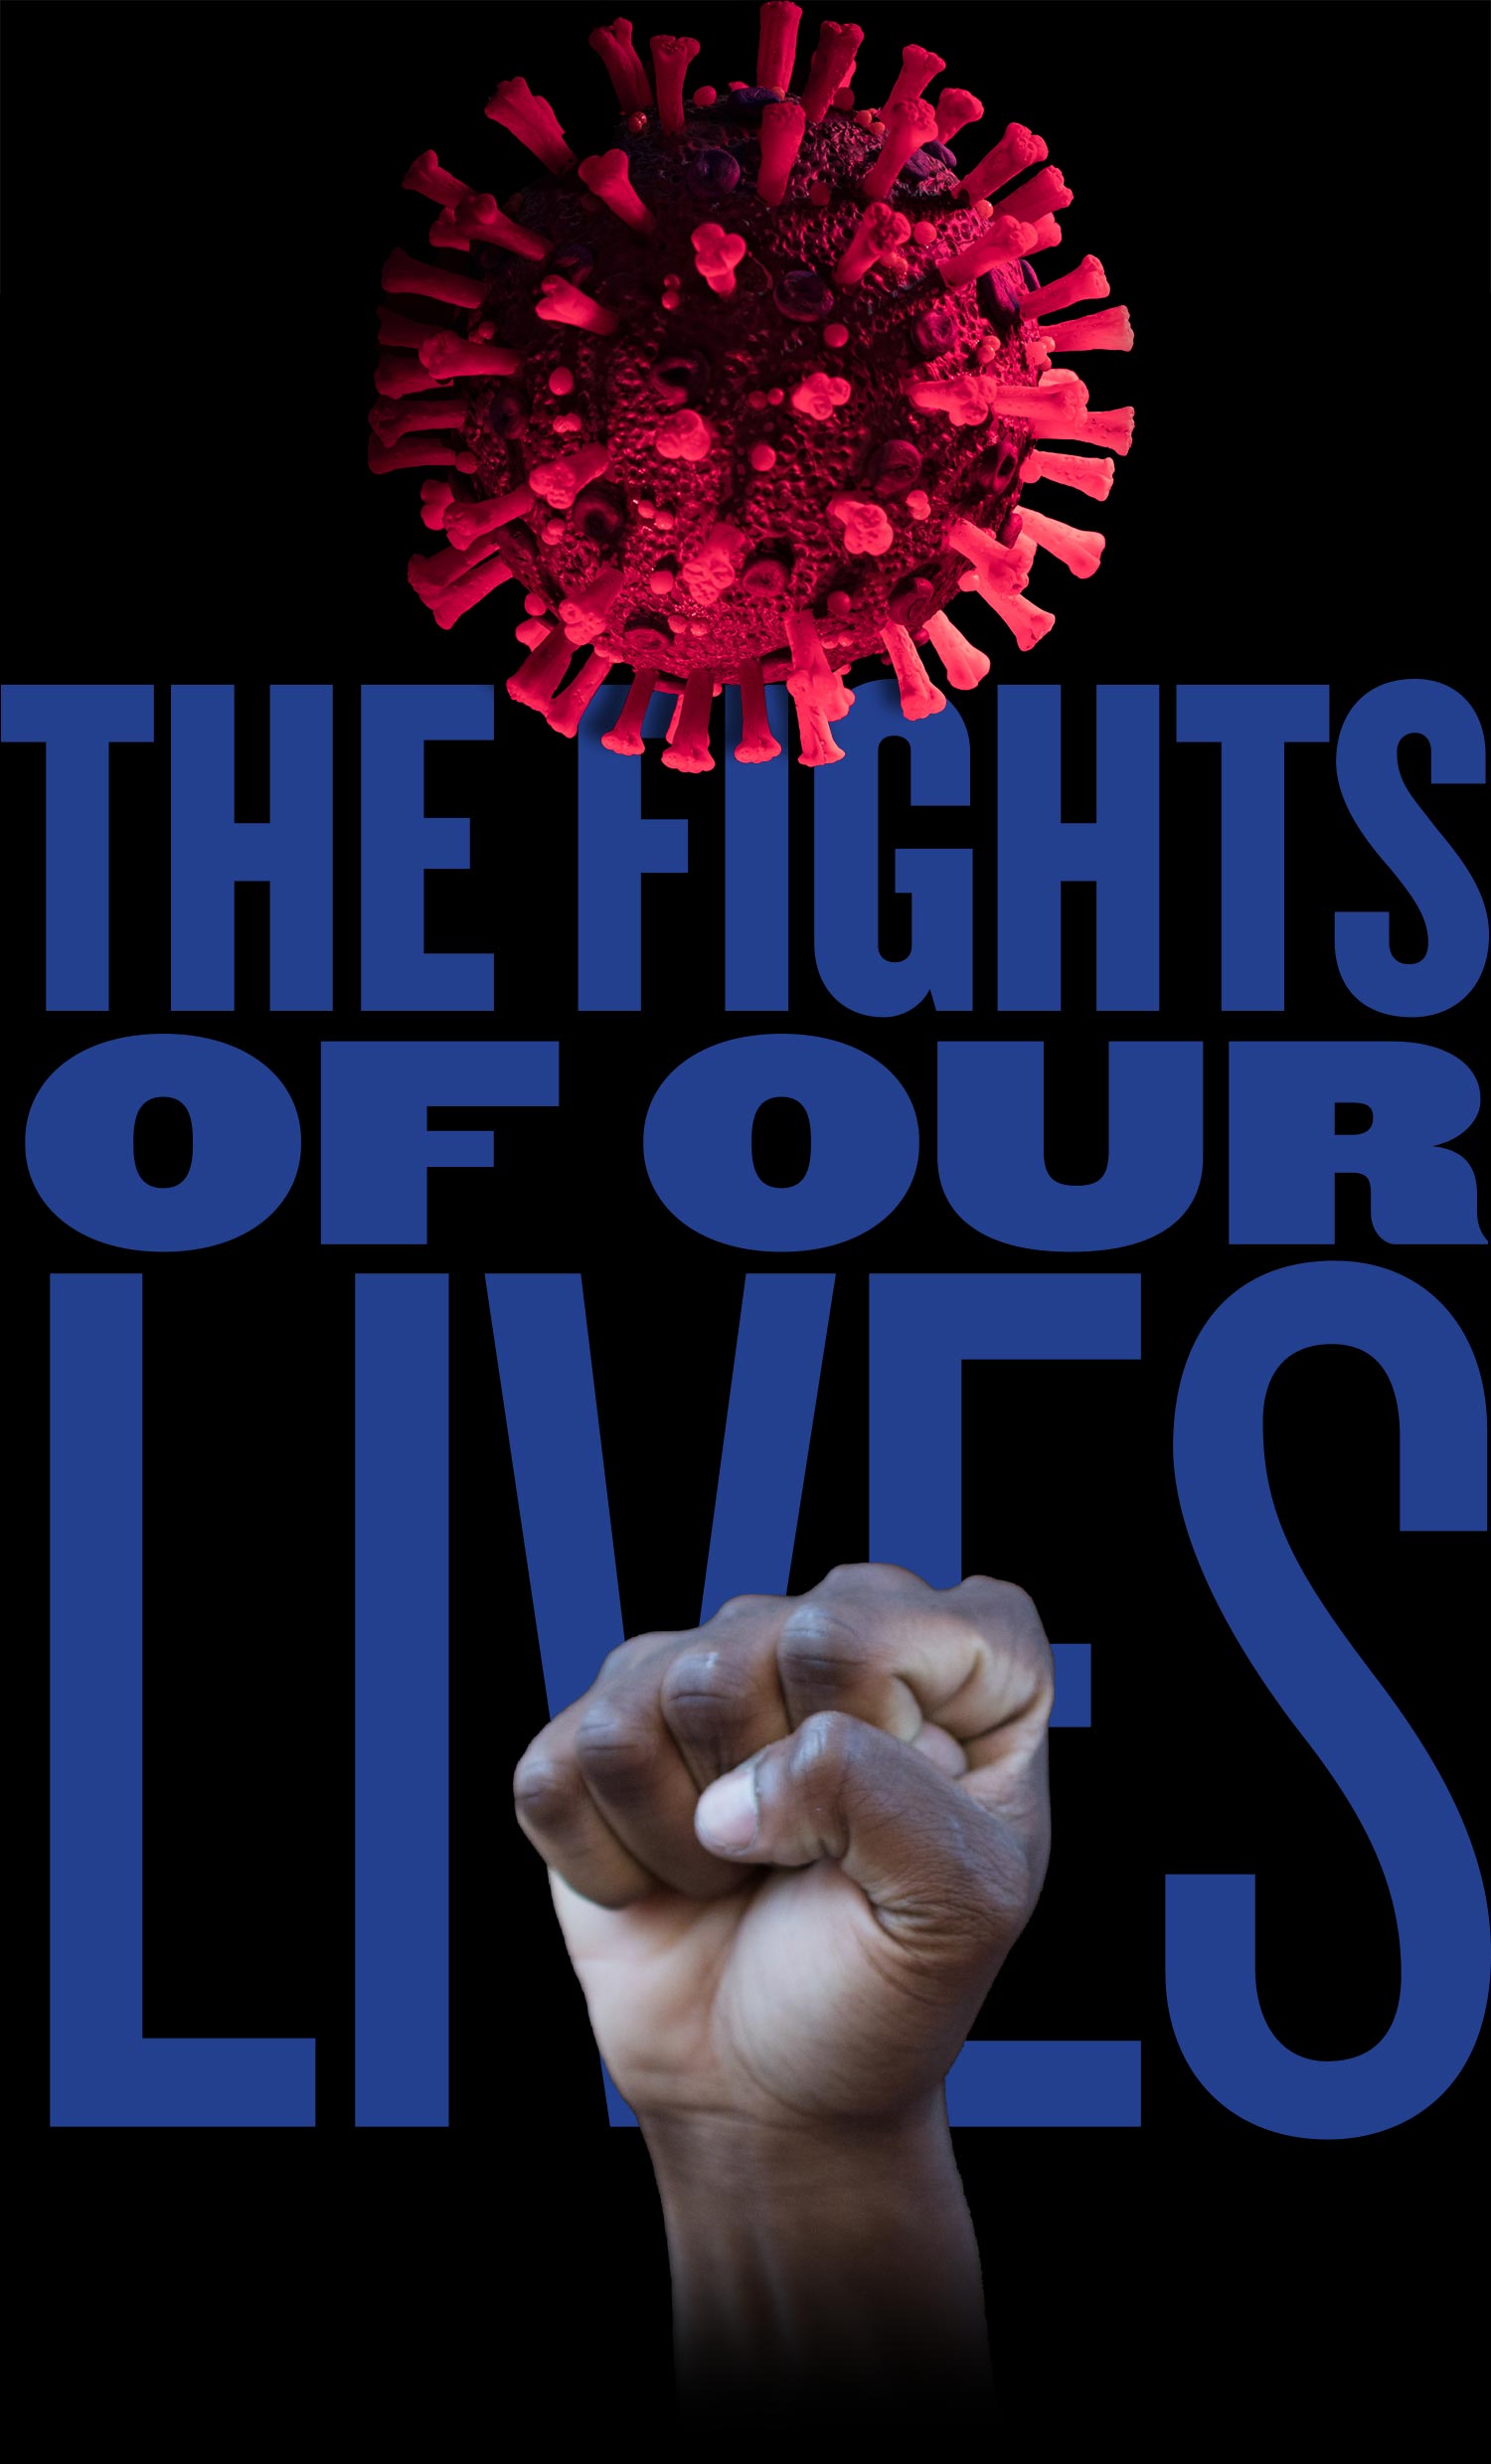 The fights of our lives typography with a virus and fist hovering over